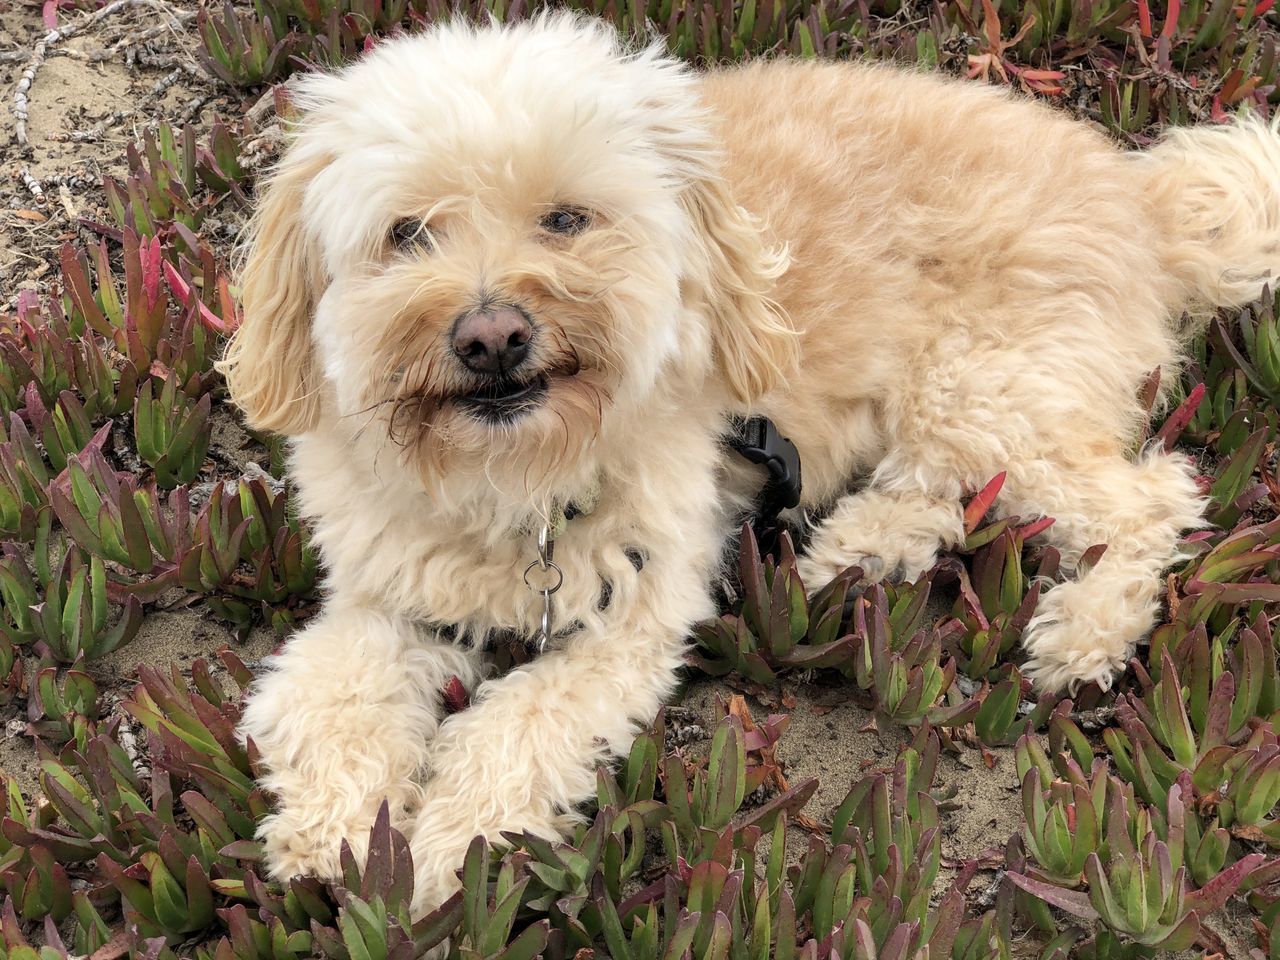 pet, dog, canine, domestic animals, animal themes, one animal, mammal, animal, portrait, looking at camera, plant, havanese, cockapoo, cute, grass, puppy, carnivore, no people, cavachon, nature, young animal, animal hair, cavapoo, relaxation